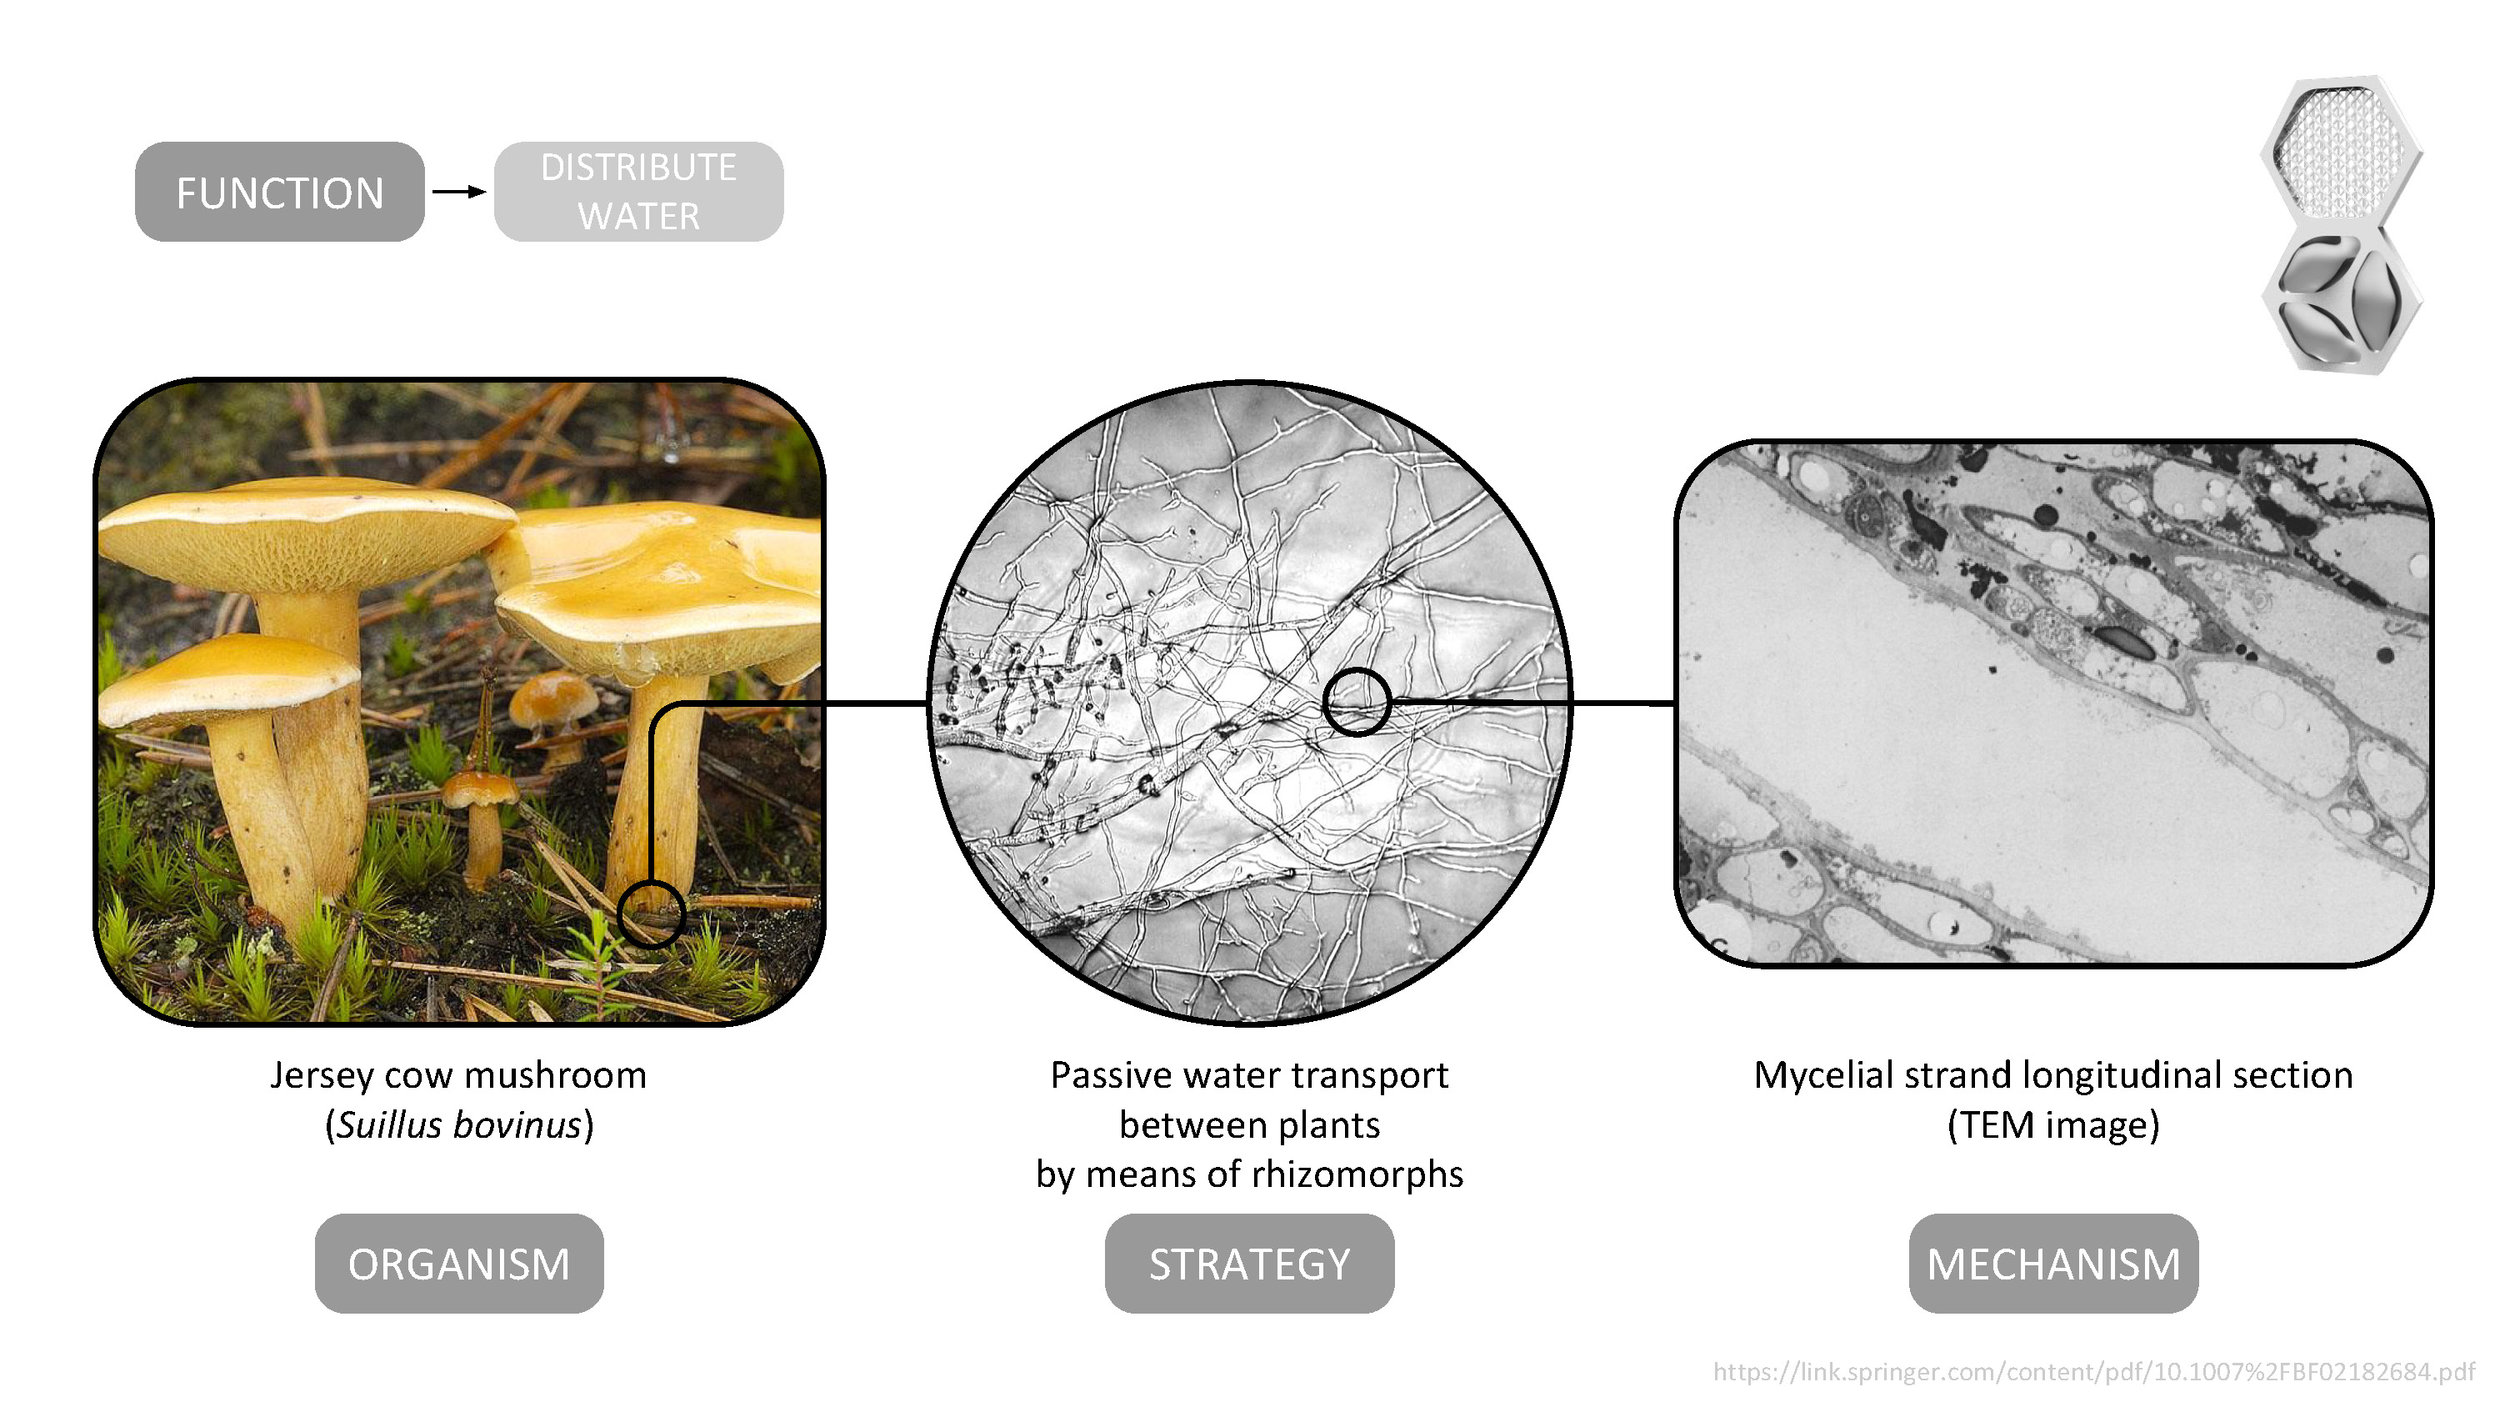  The design of the water distribution strategy in the AquaWeb system mimics the apoplastic water pathway seen in the rhizomorph cells of the Jersey cow mushroom ( Suillus bovinus ) by integrating water flow channels into the walls of the modular unit